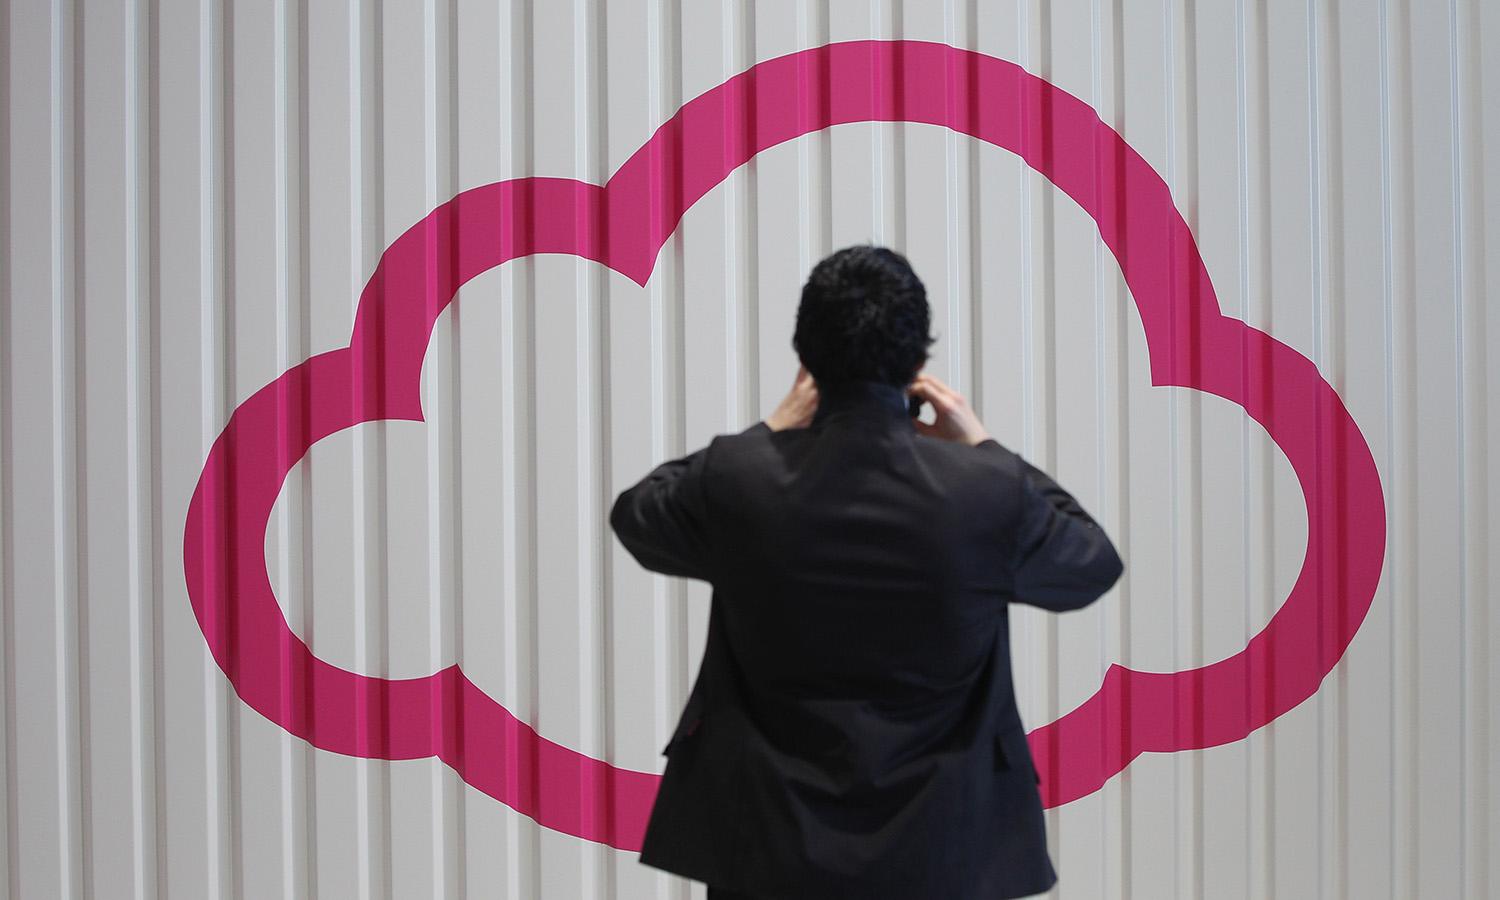 A visitor photographs a symbol of a cloud at the Deutsche Telekom stand the day before the CeBIT 2012 technology trade fair officially opens to the public on March 5, 2012, in Hanover, Germany.(Photo by Sean Gallup/Getty Images)